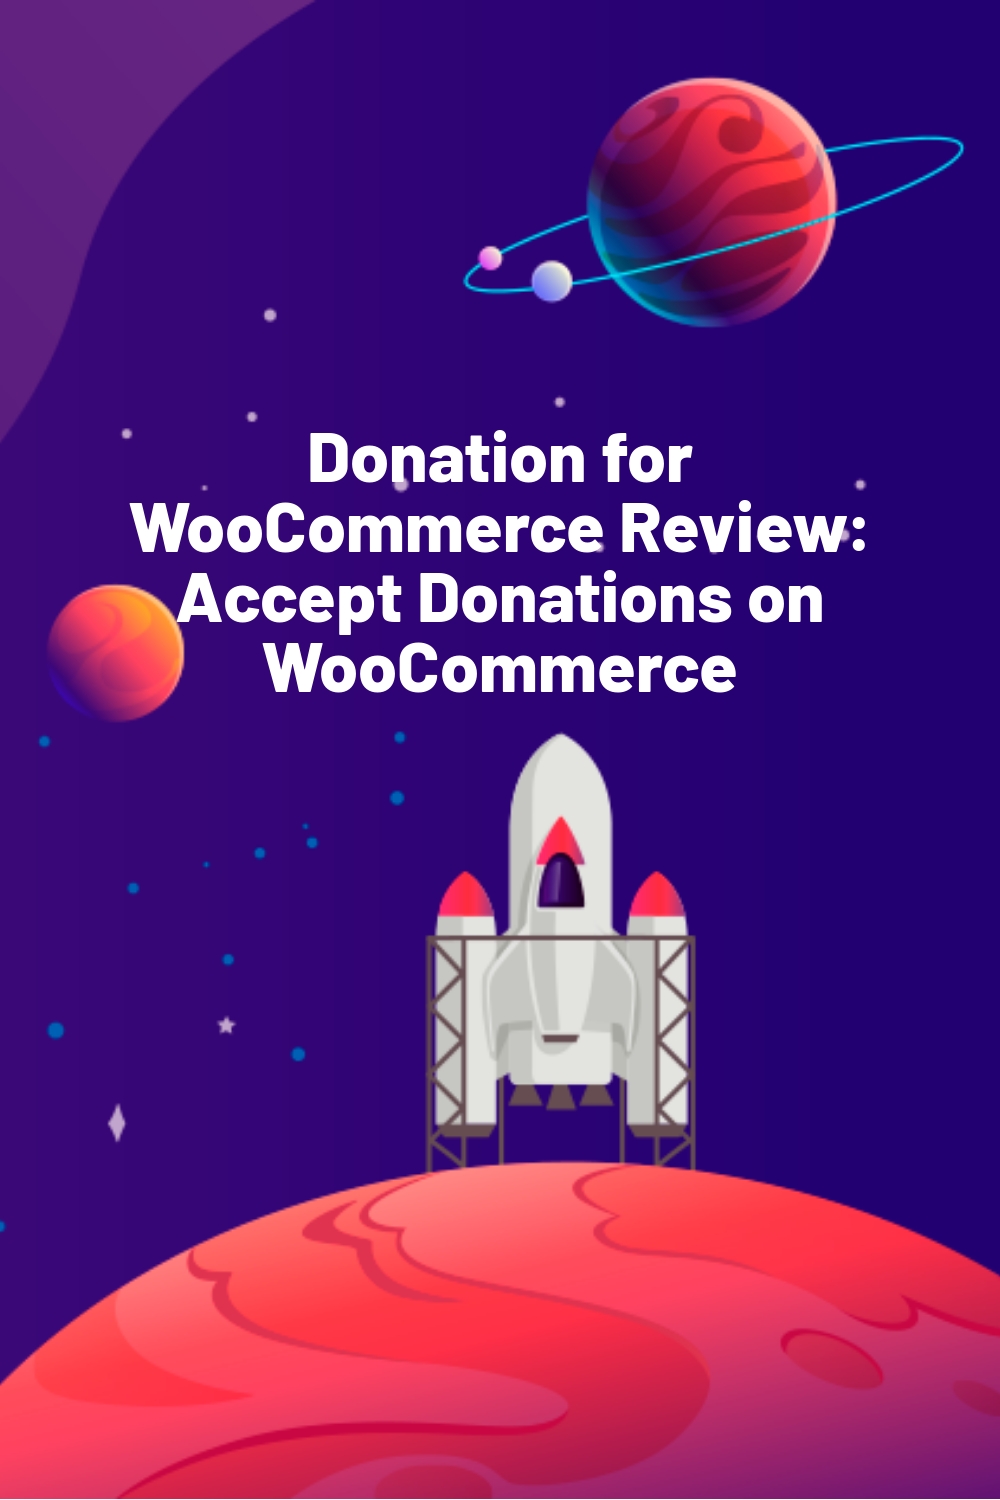 Donation for WooCommerce Review: Accept Donations on WooCommerce